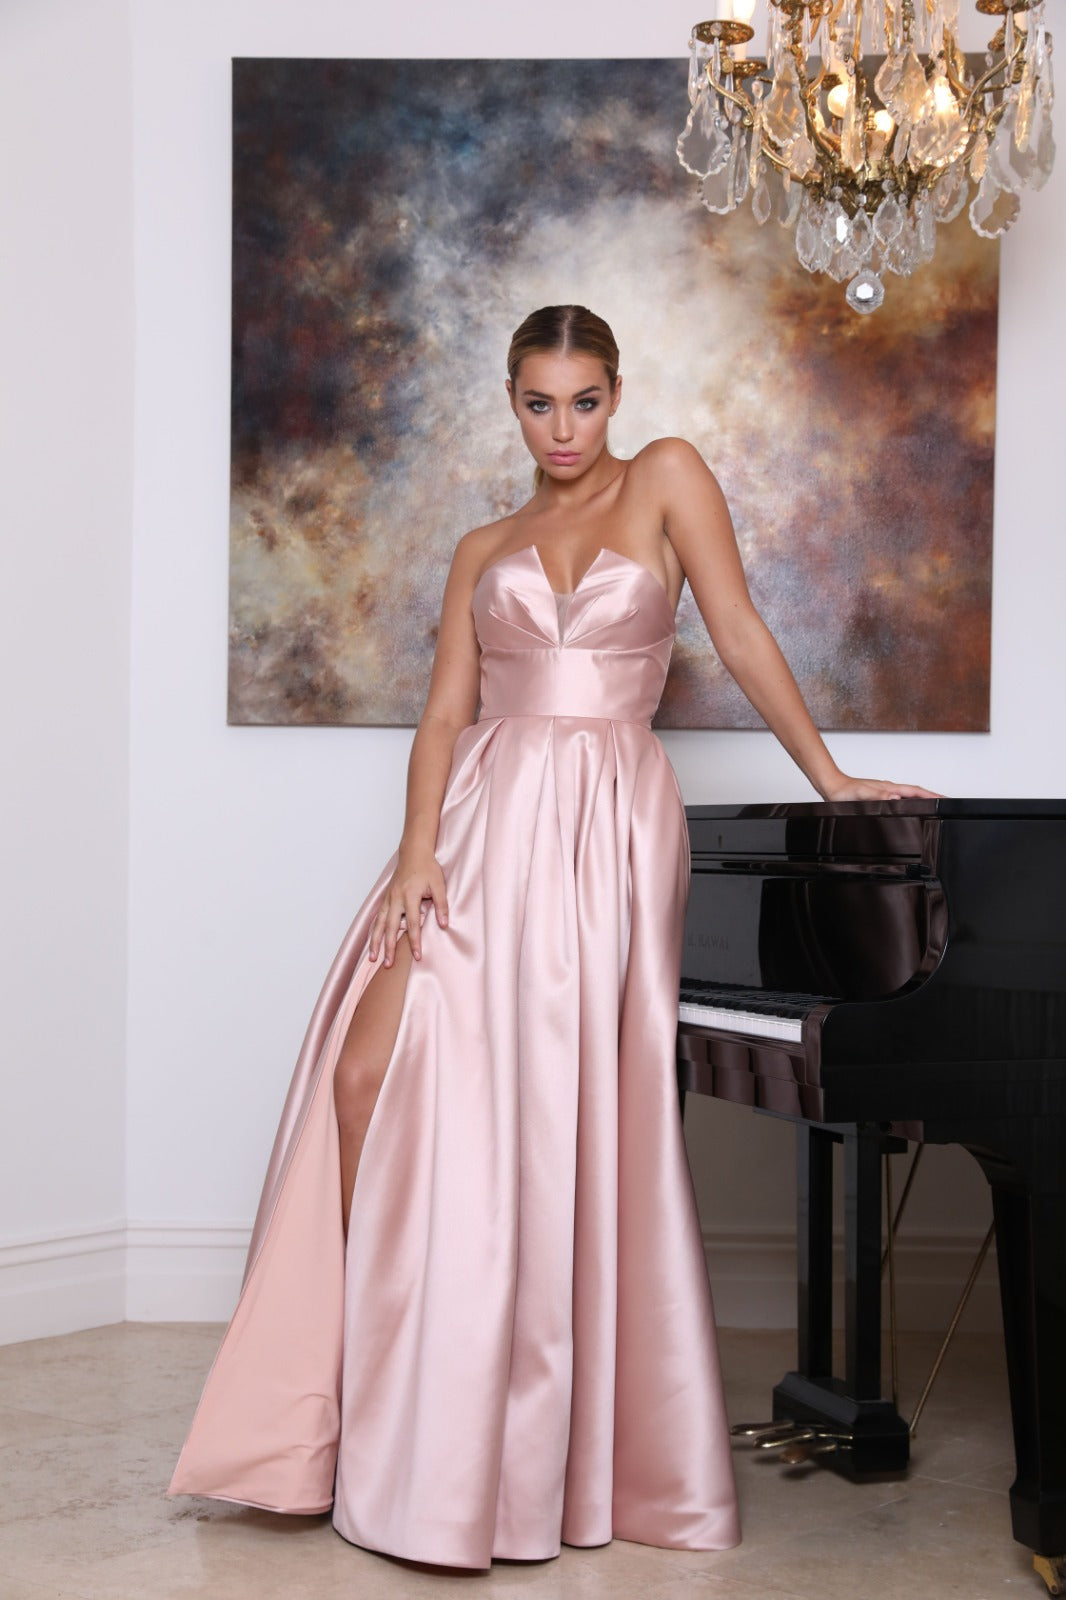 Tinaholy Couture TA611 Dusty Pink Strapless Ball Gown Formal Dress Tina Holly Couture$ AfterPay Humm ZipPay LayBuy Sezzle